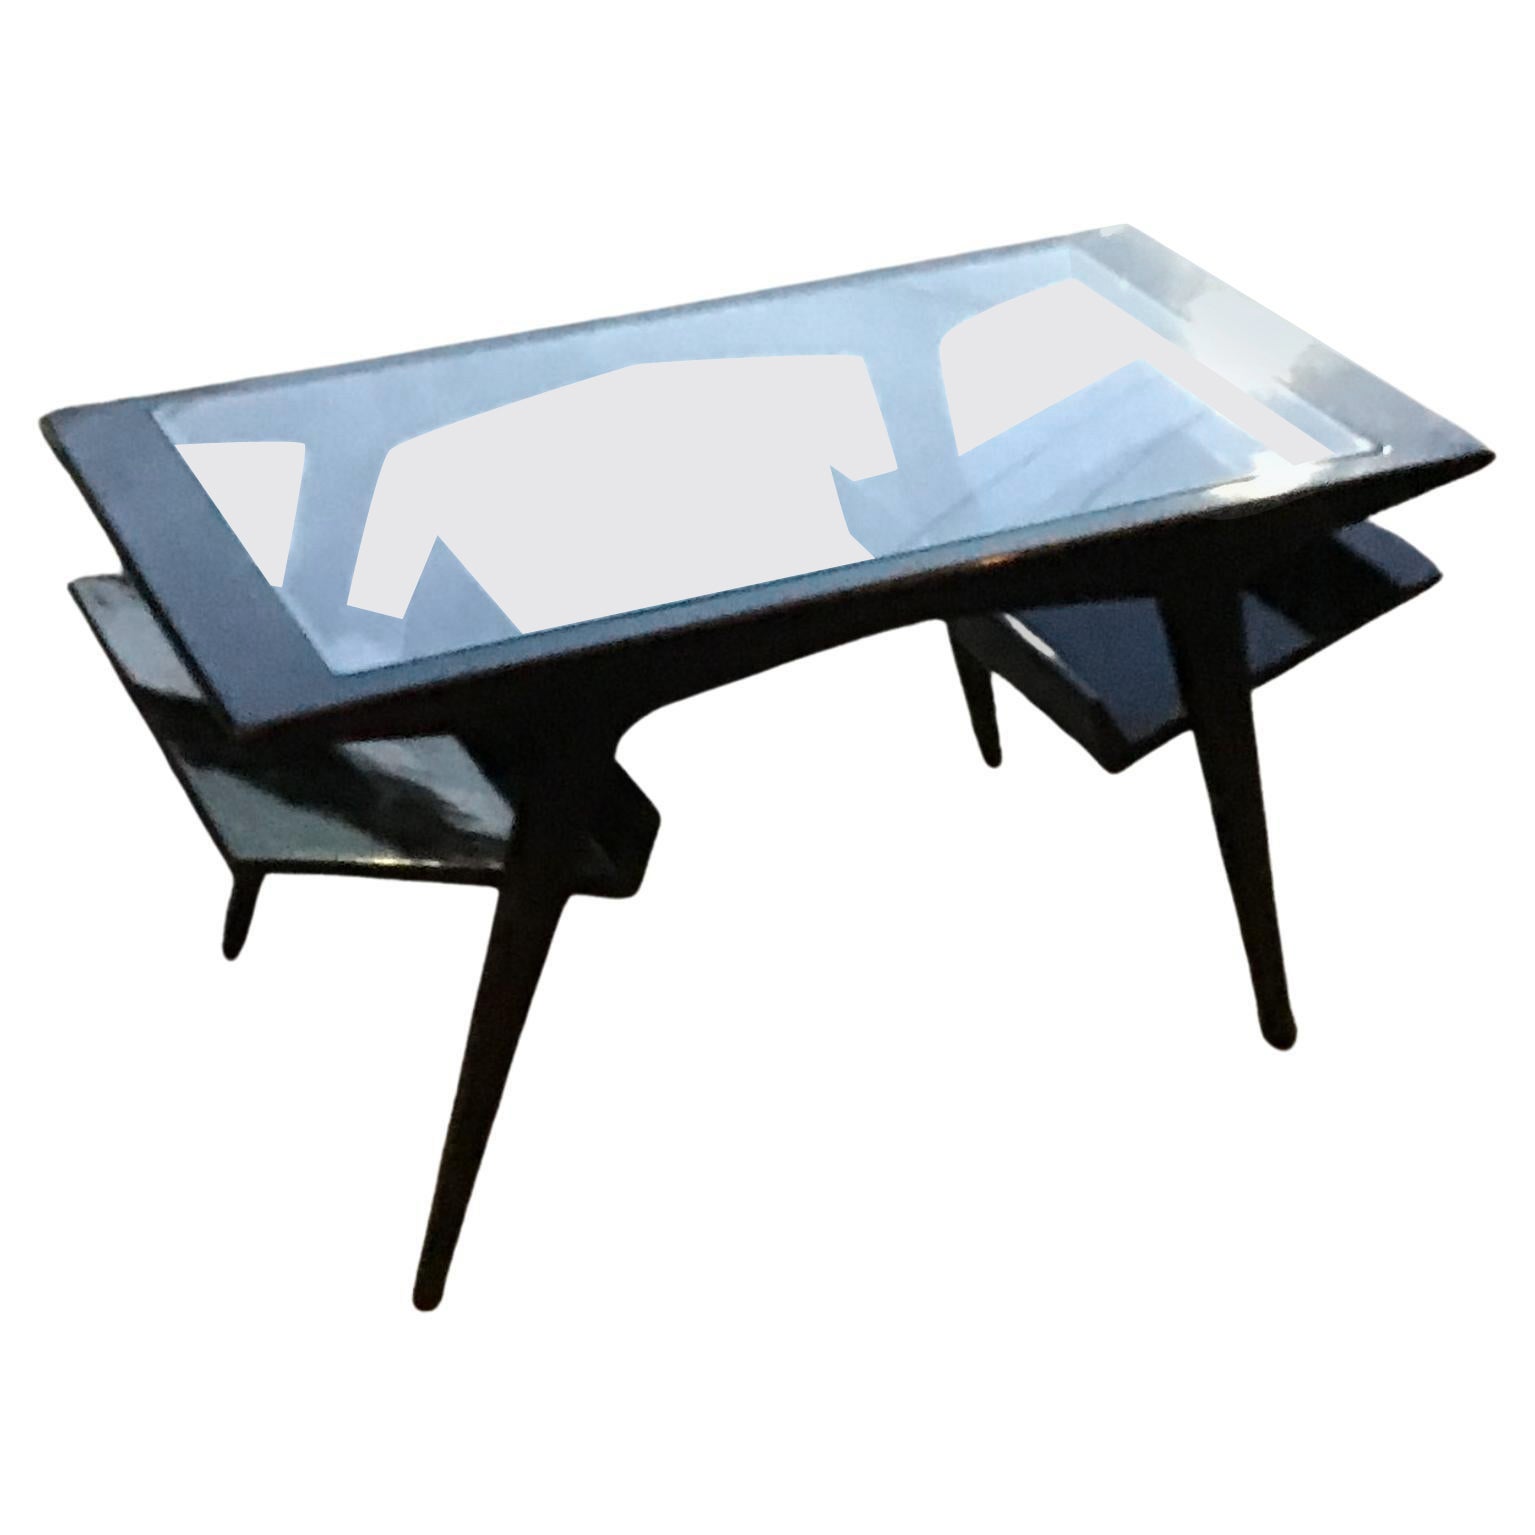 Gio Ponti Coffee Table Wood Glass 1950 Italy For Sale